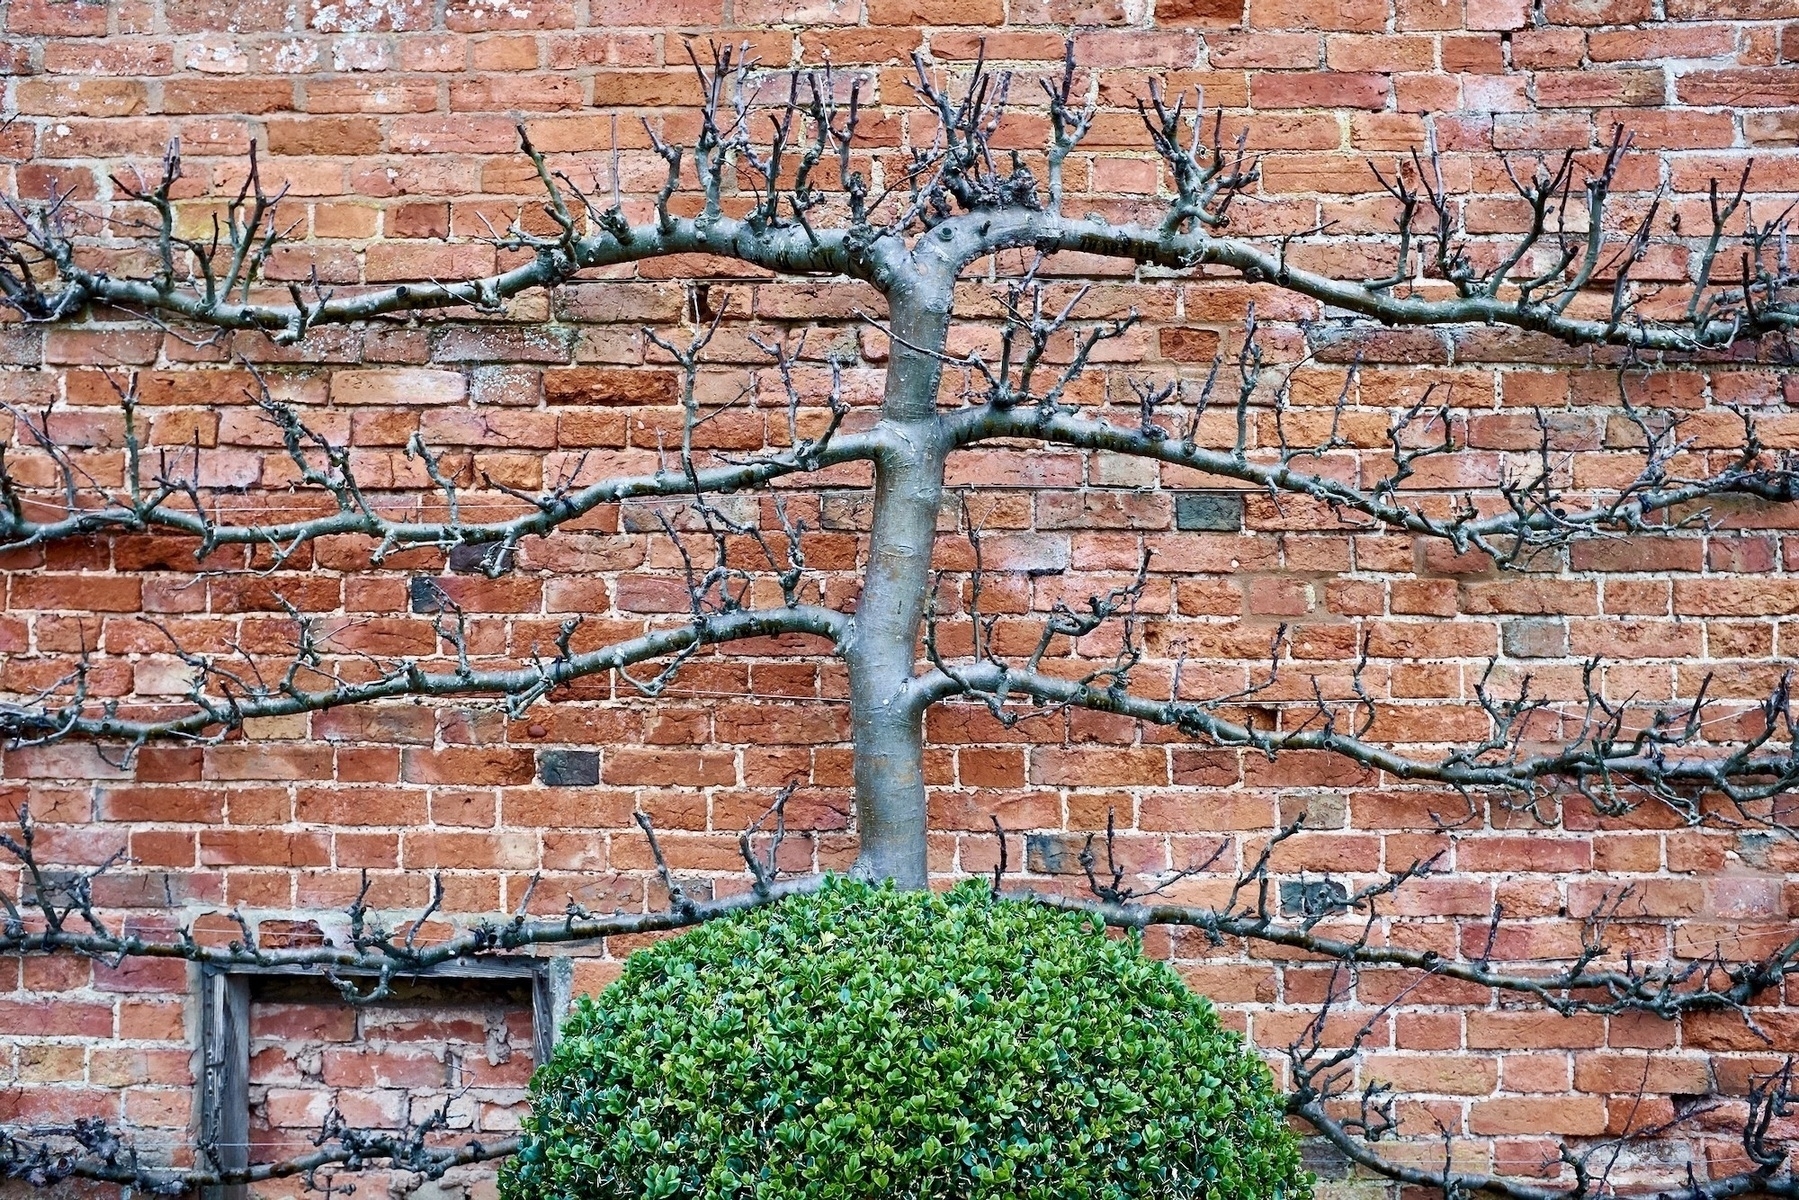 A fruit tree, bare of leaves, trained in the ‘espallier’ style to grow flat against a brick wall, with the branches growing horizontally. At the base of the tree, there is a box plant clipped into a ball.